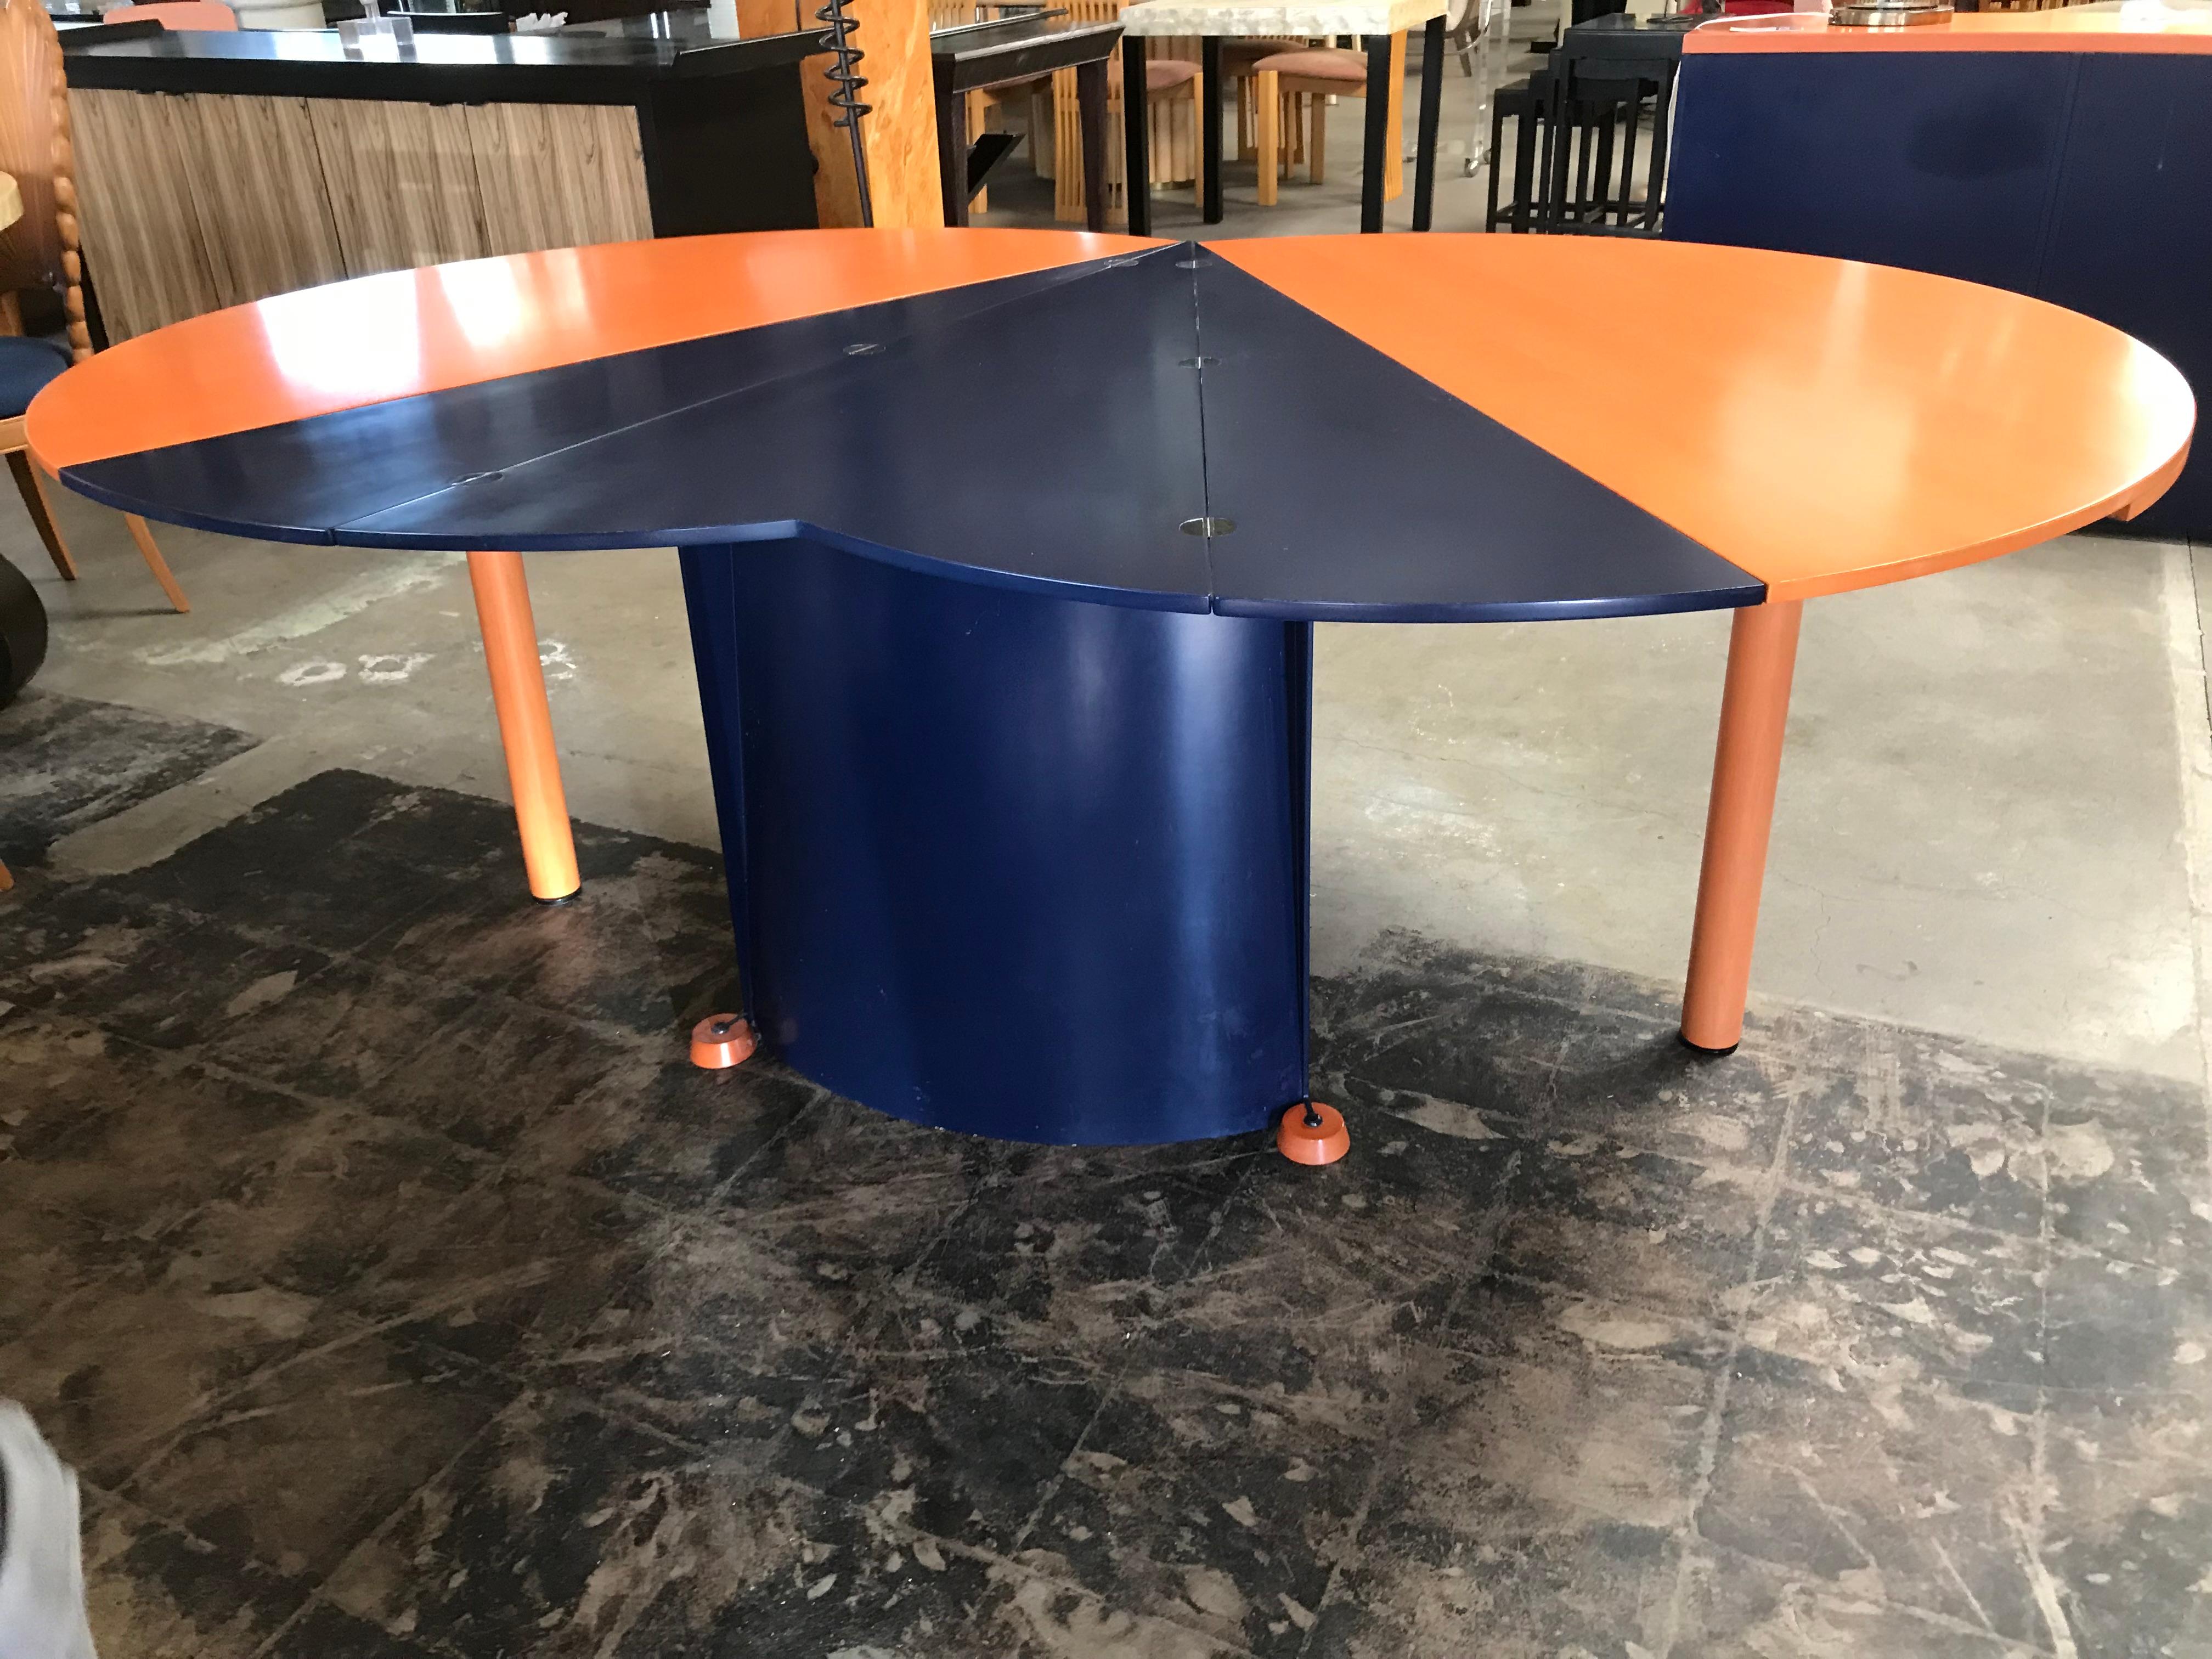 One of kind two-toned dining table in terracotta orange and navy blue stained wood, manufactured by Castelijn Meubelindustrie in the Netherlands. 
It folds into a smaller round table (diameter: 51